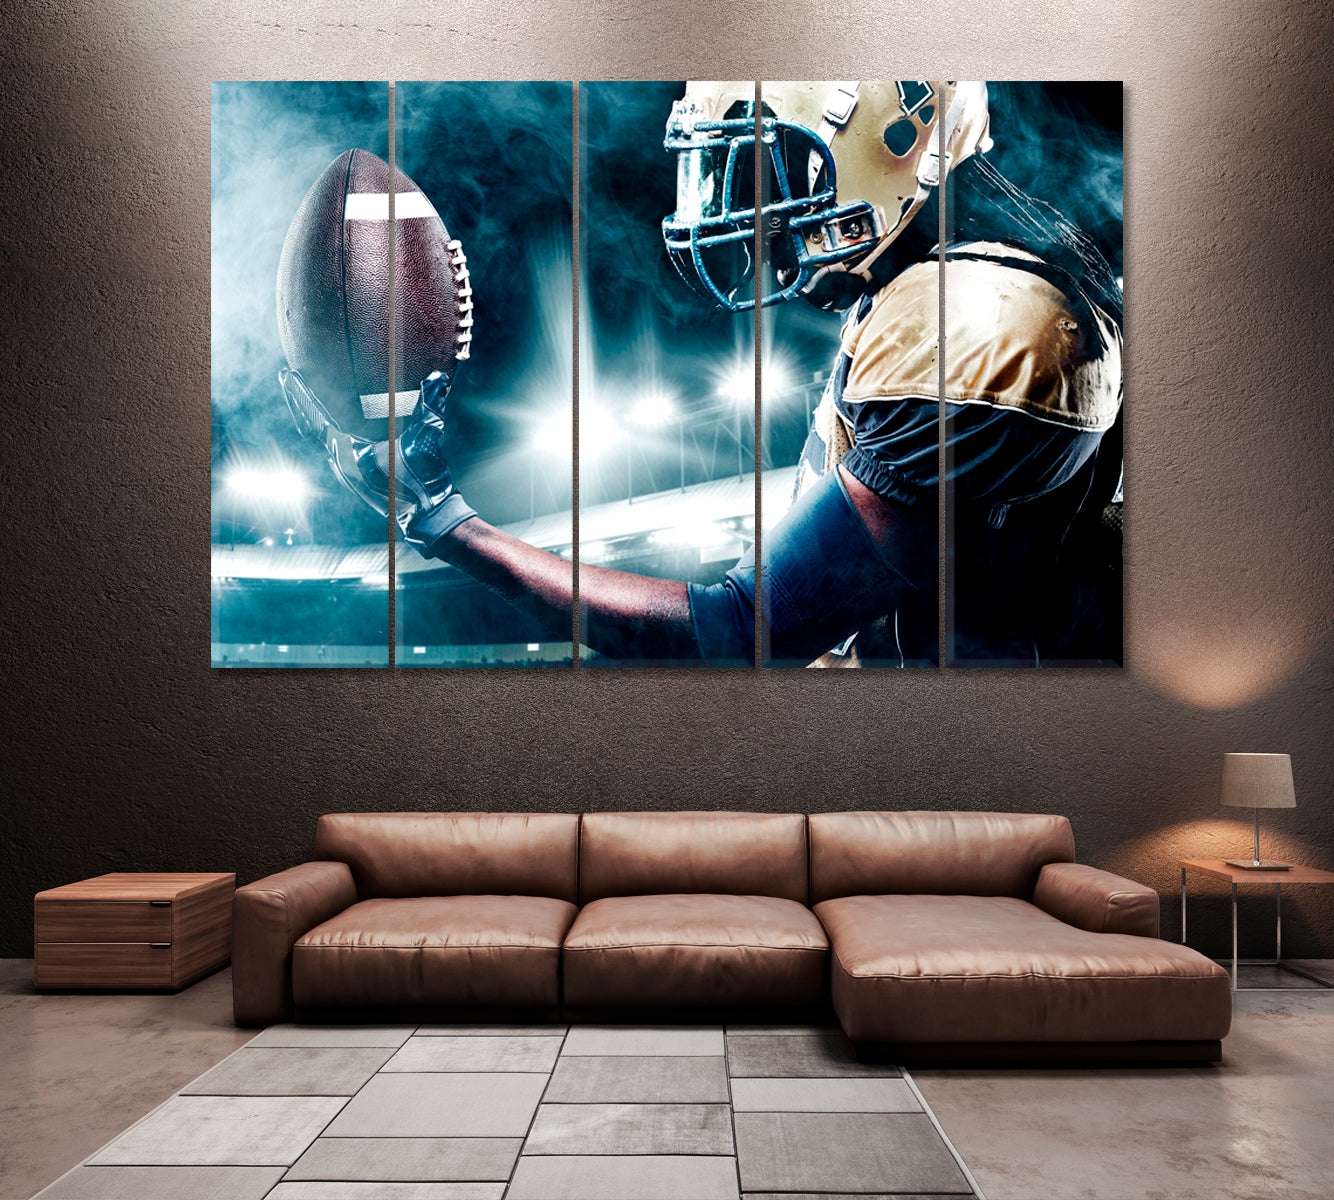 American Football Player in Action Canvas Print ArtLexy 5 Panels 36"x24" inches 